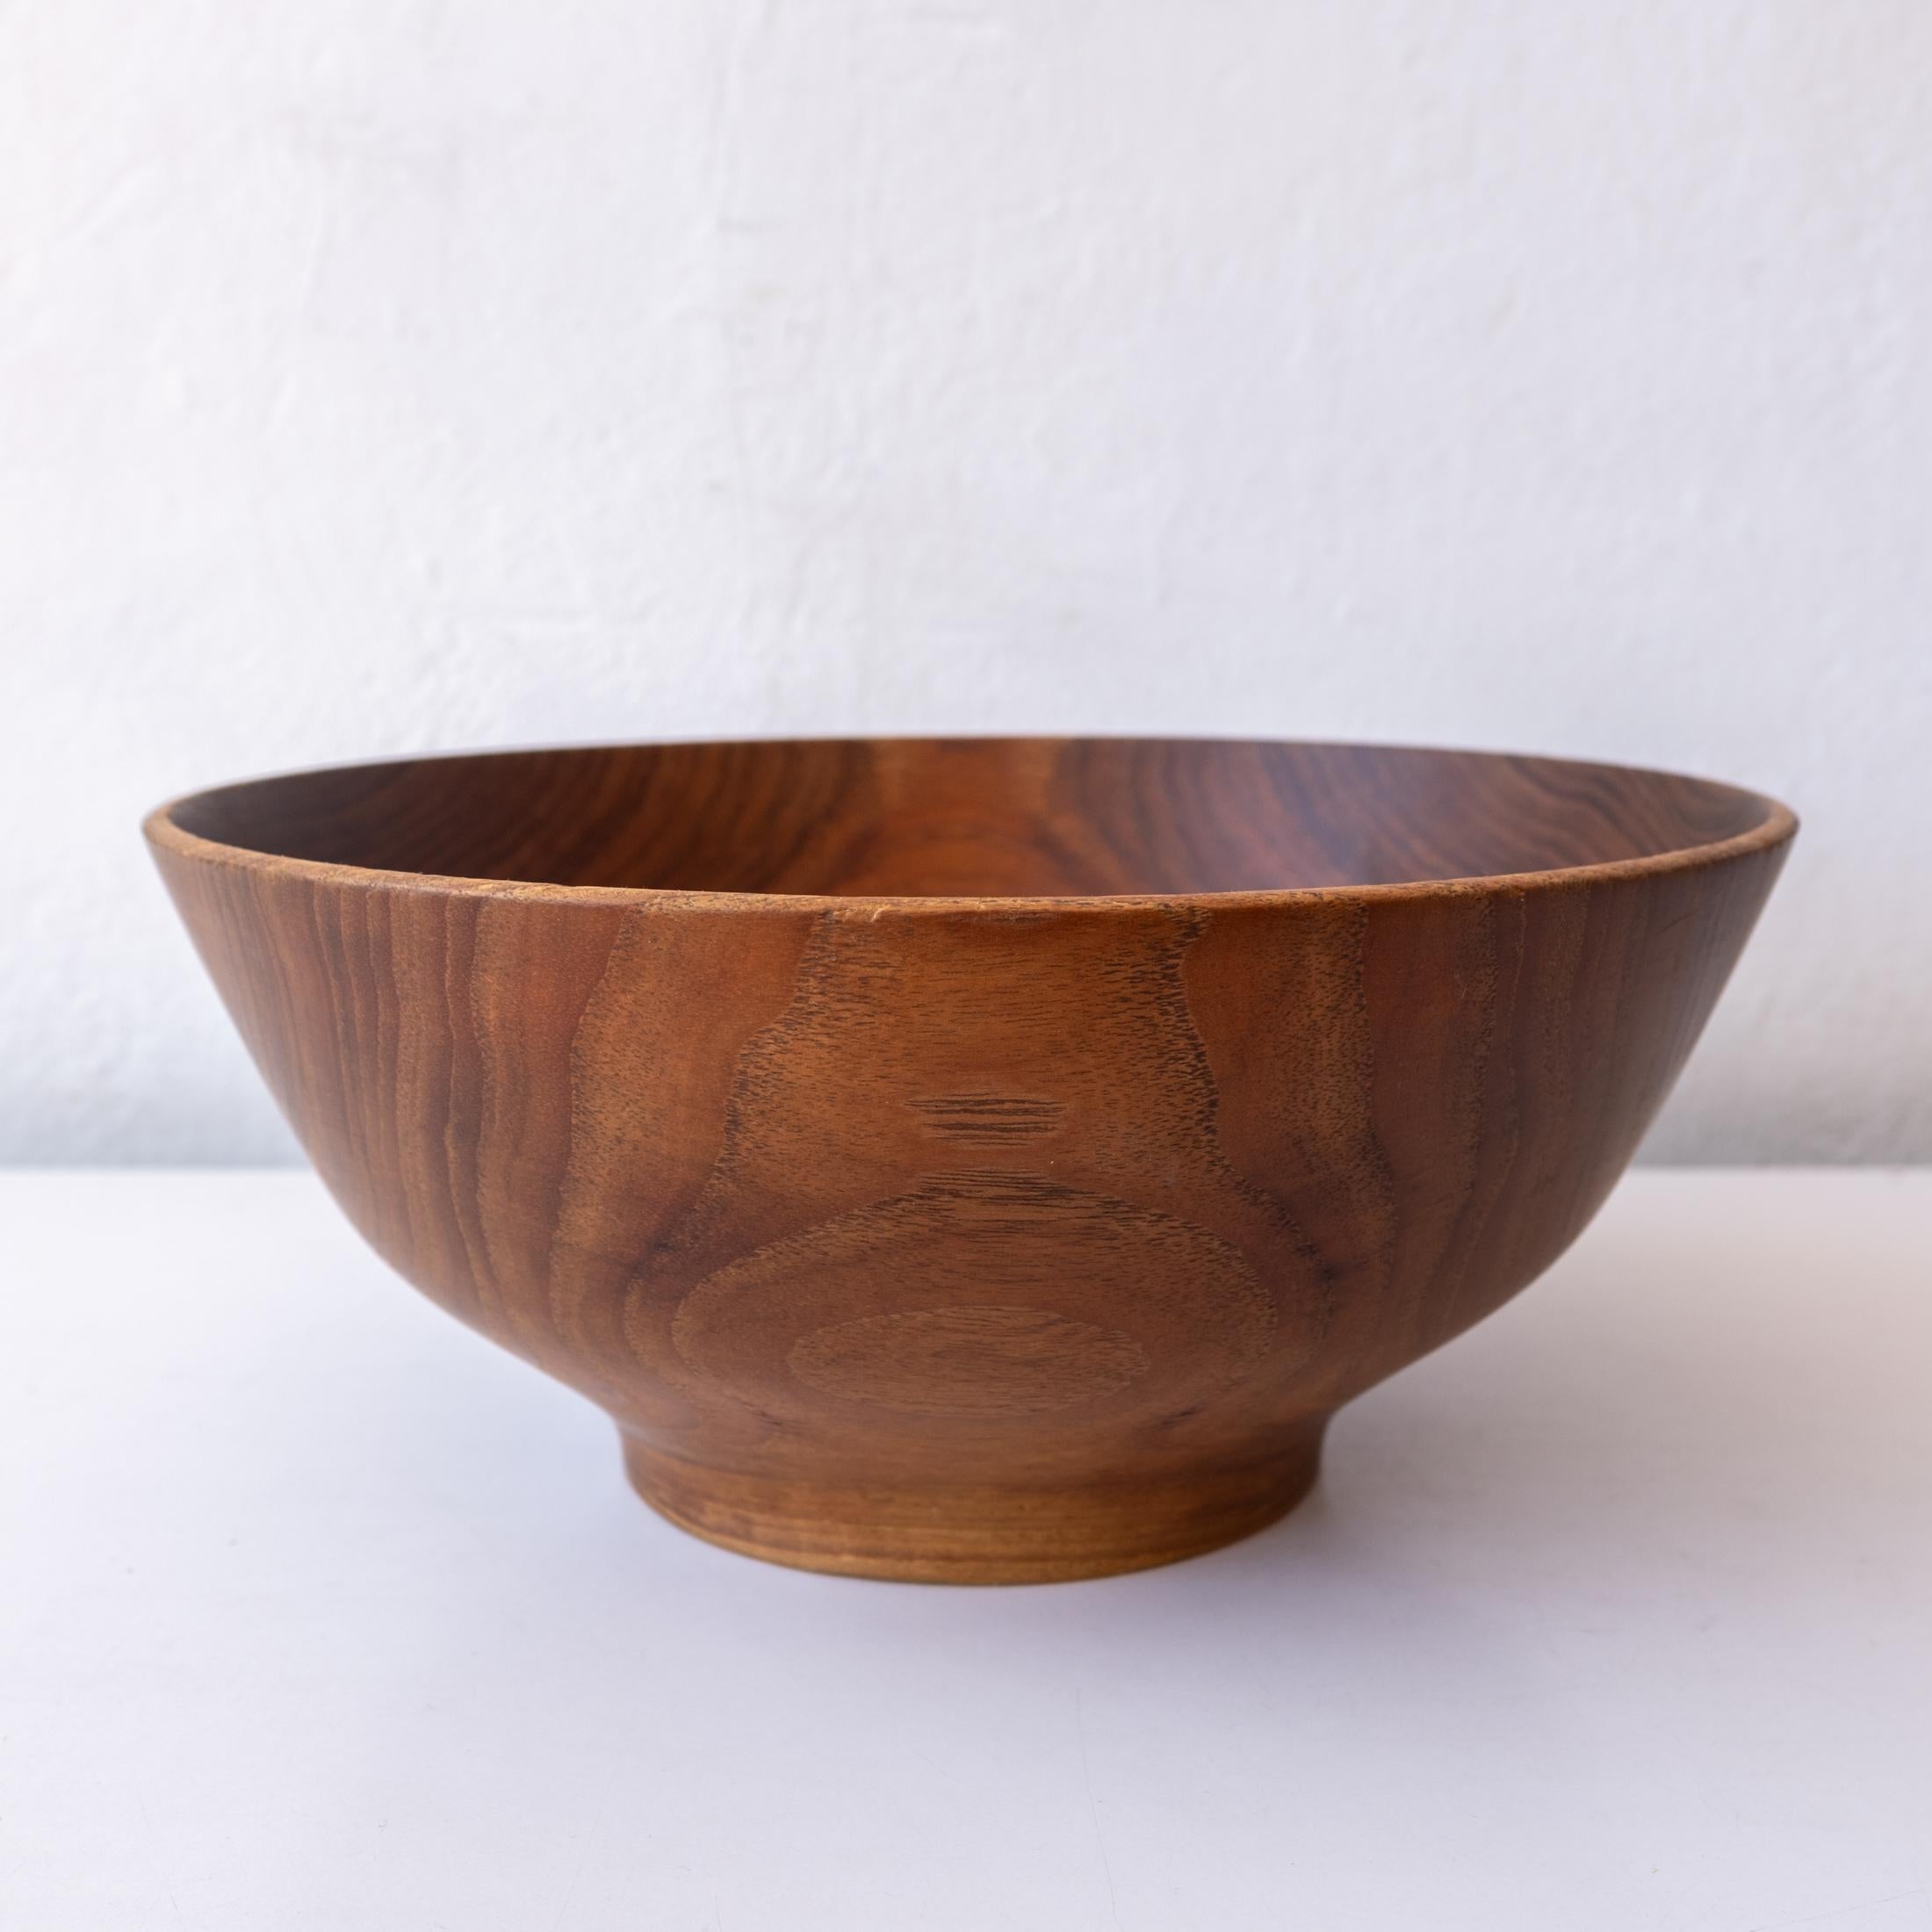 Studio Turned Teak Footed Bowl by Bob Stocksdale In Good Condition For Sale In San Diego, CA